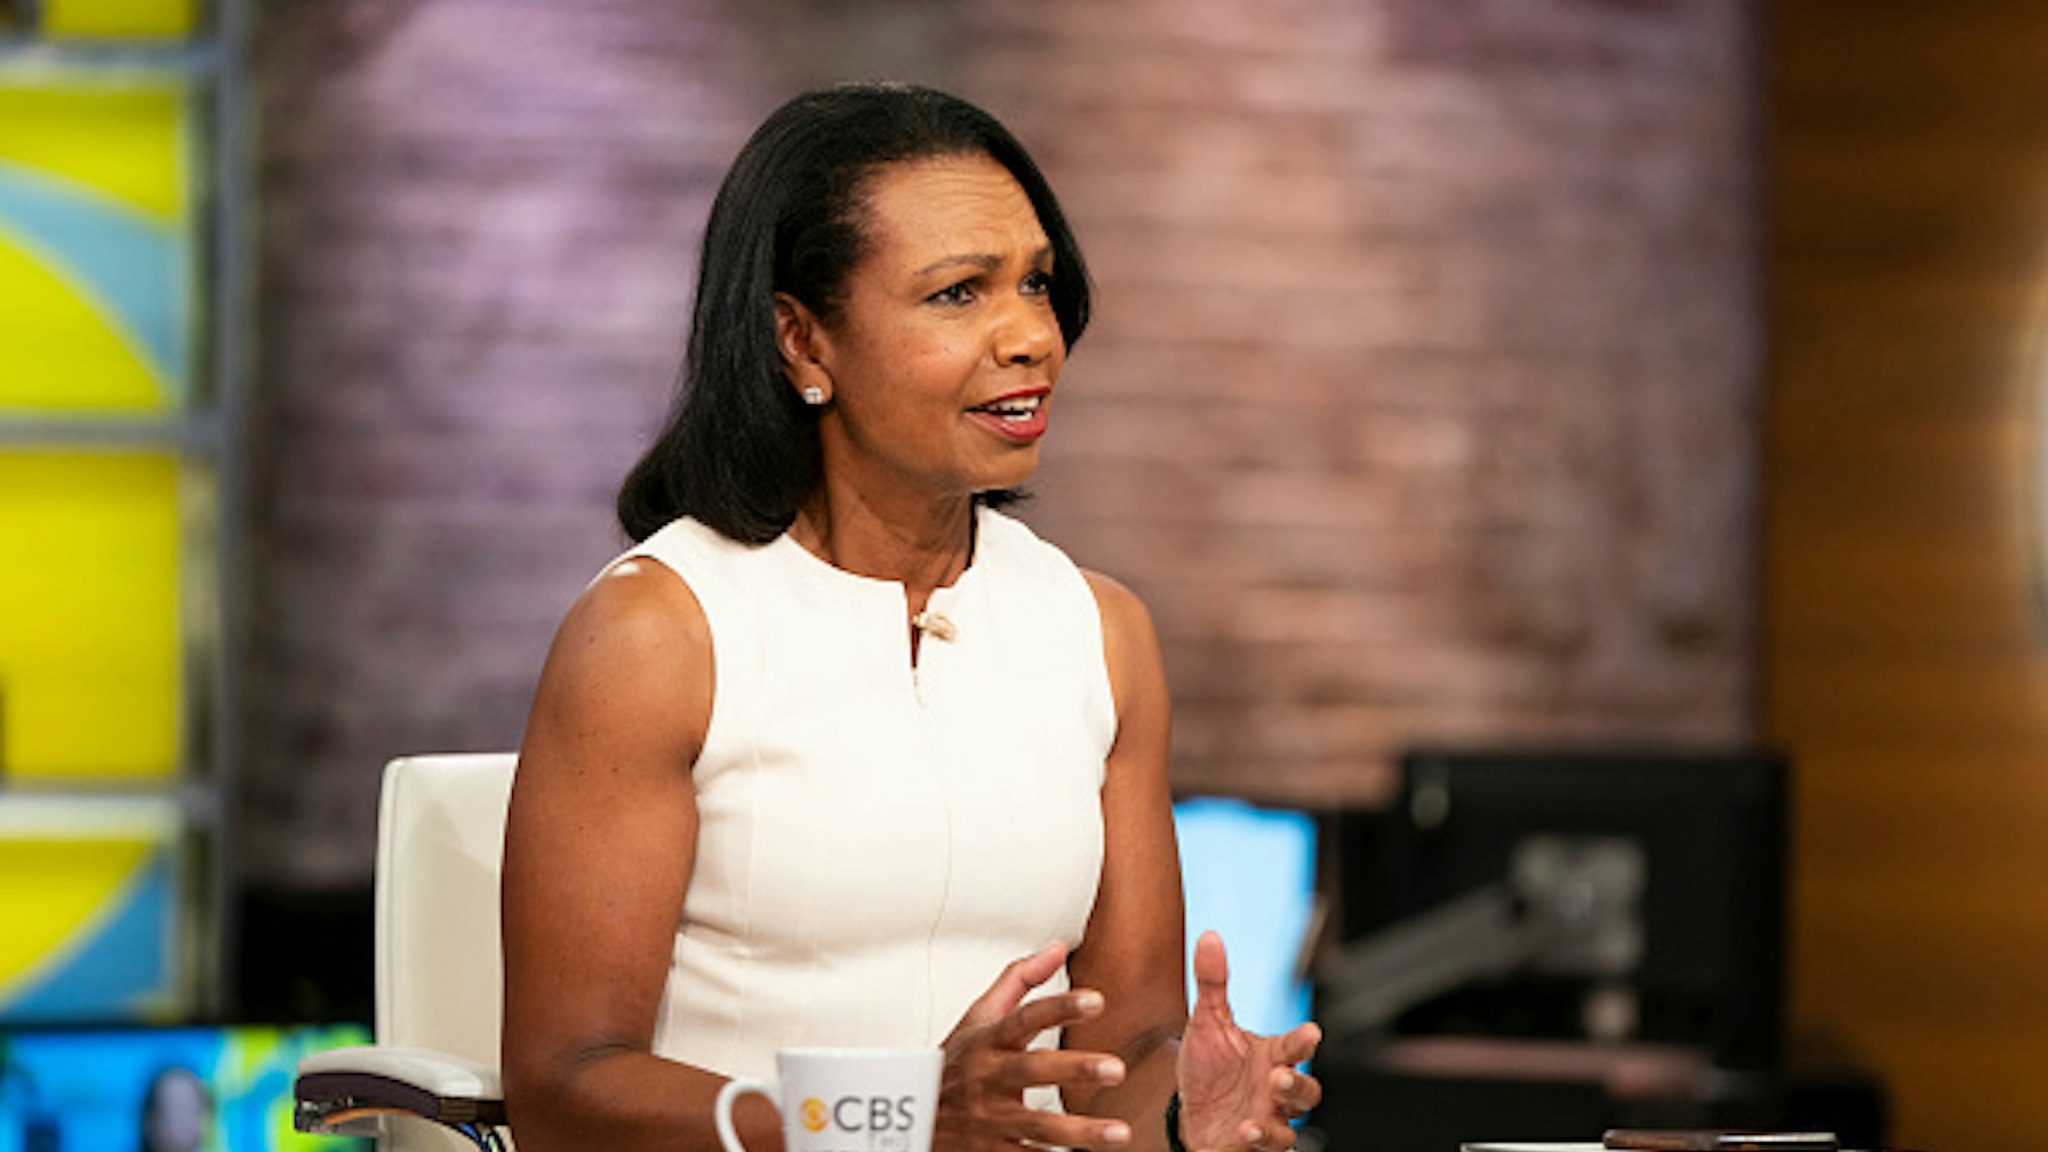 NEW YORK - SEPTEMBER 10: CBS THIS MORNING Co-Anchors Gayle King, Anthony Mason and Tony Dokoupil interview Michael Bloomberg, Condoleezza Rice, and Greta Thunberg Live on September 10, 2019.